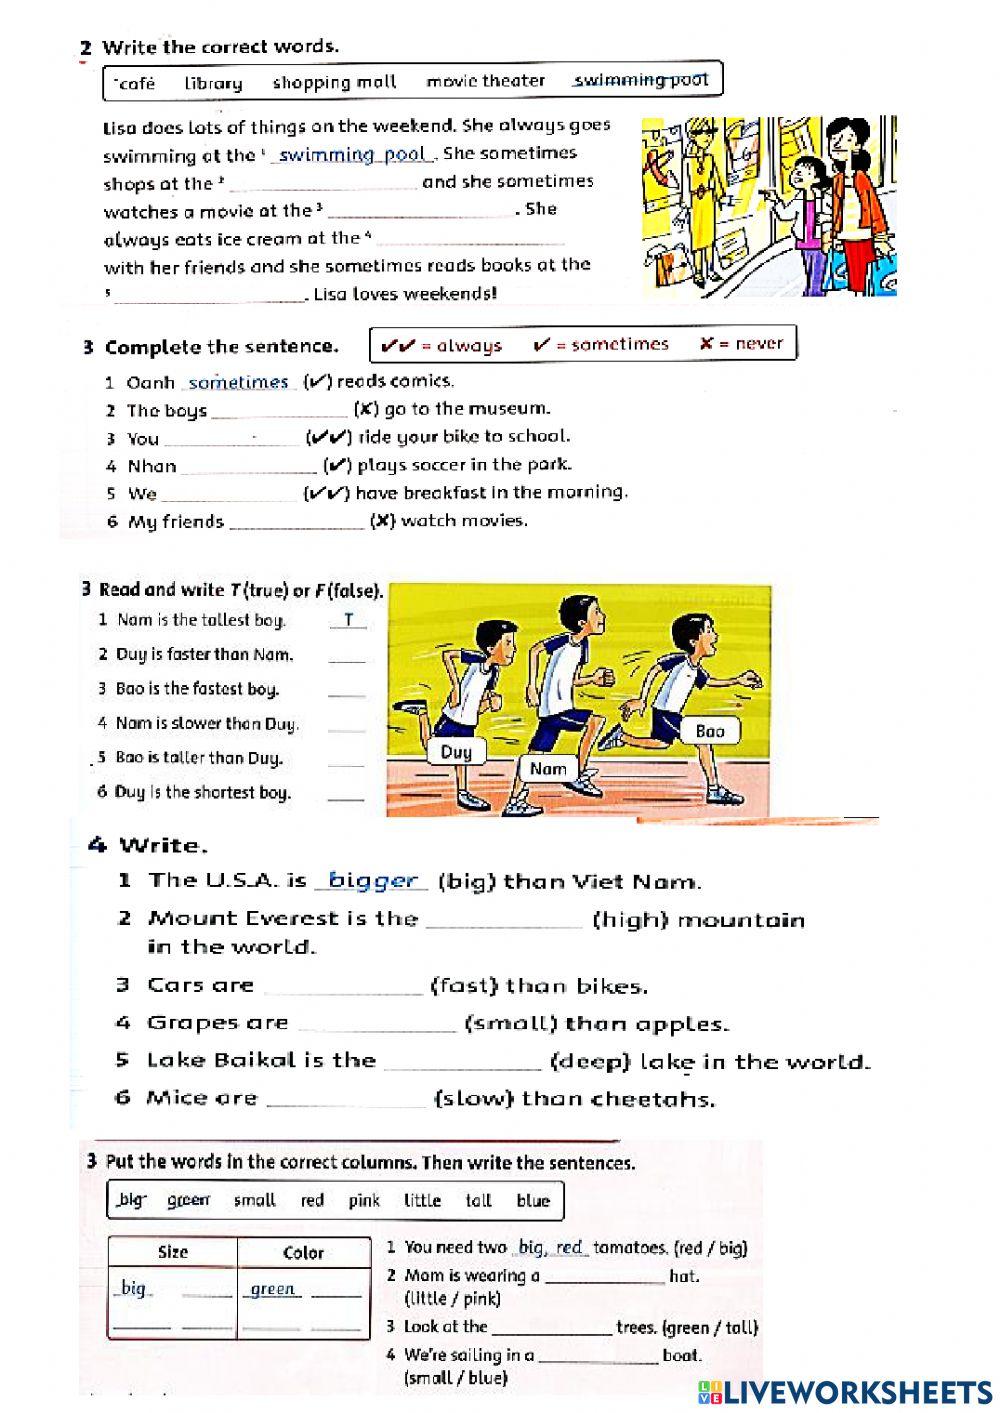 Grade 4- Family and friends 4 special- Tiếng anh 4